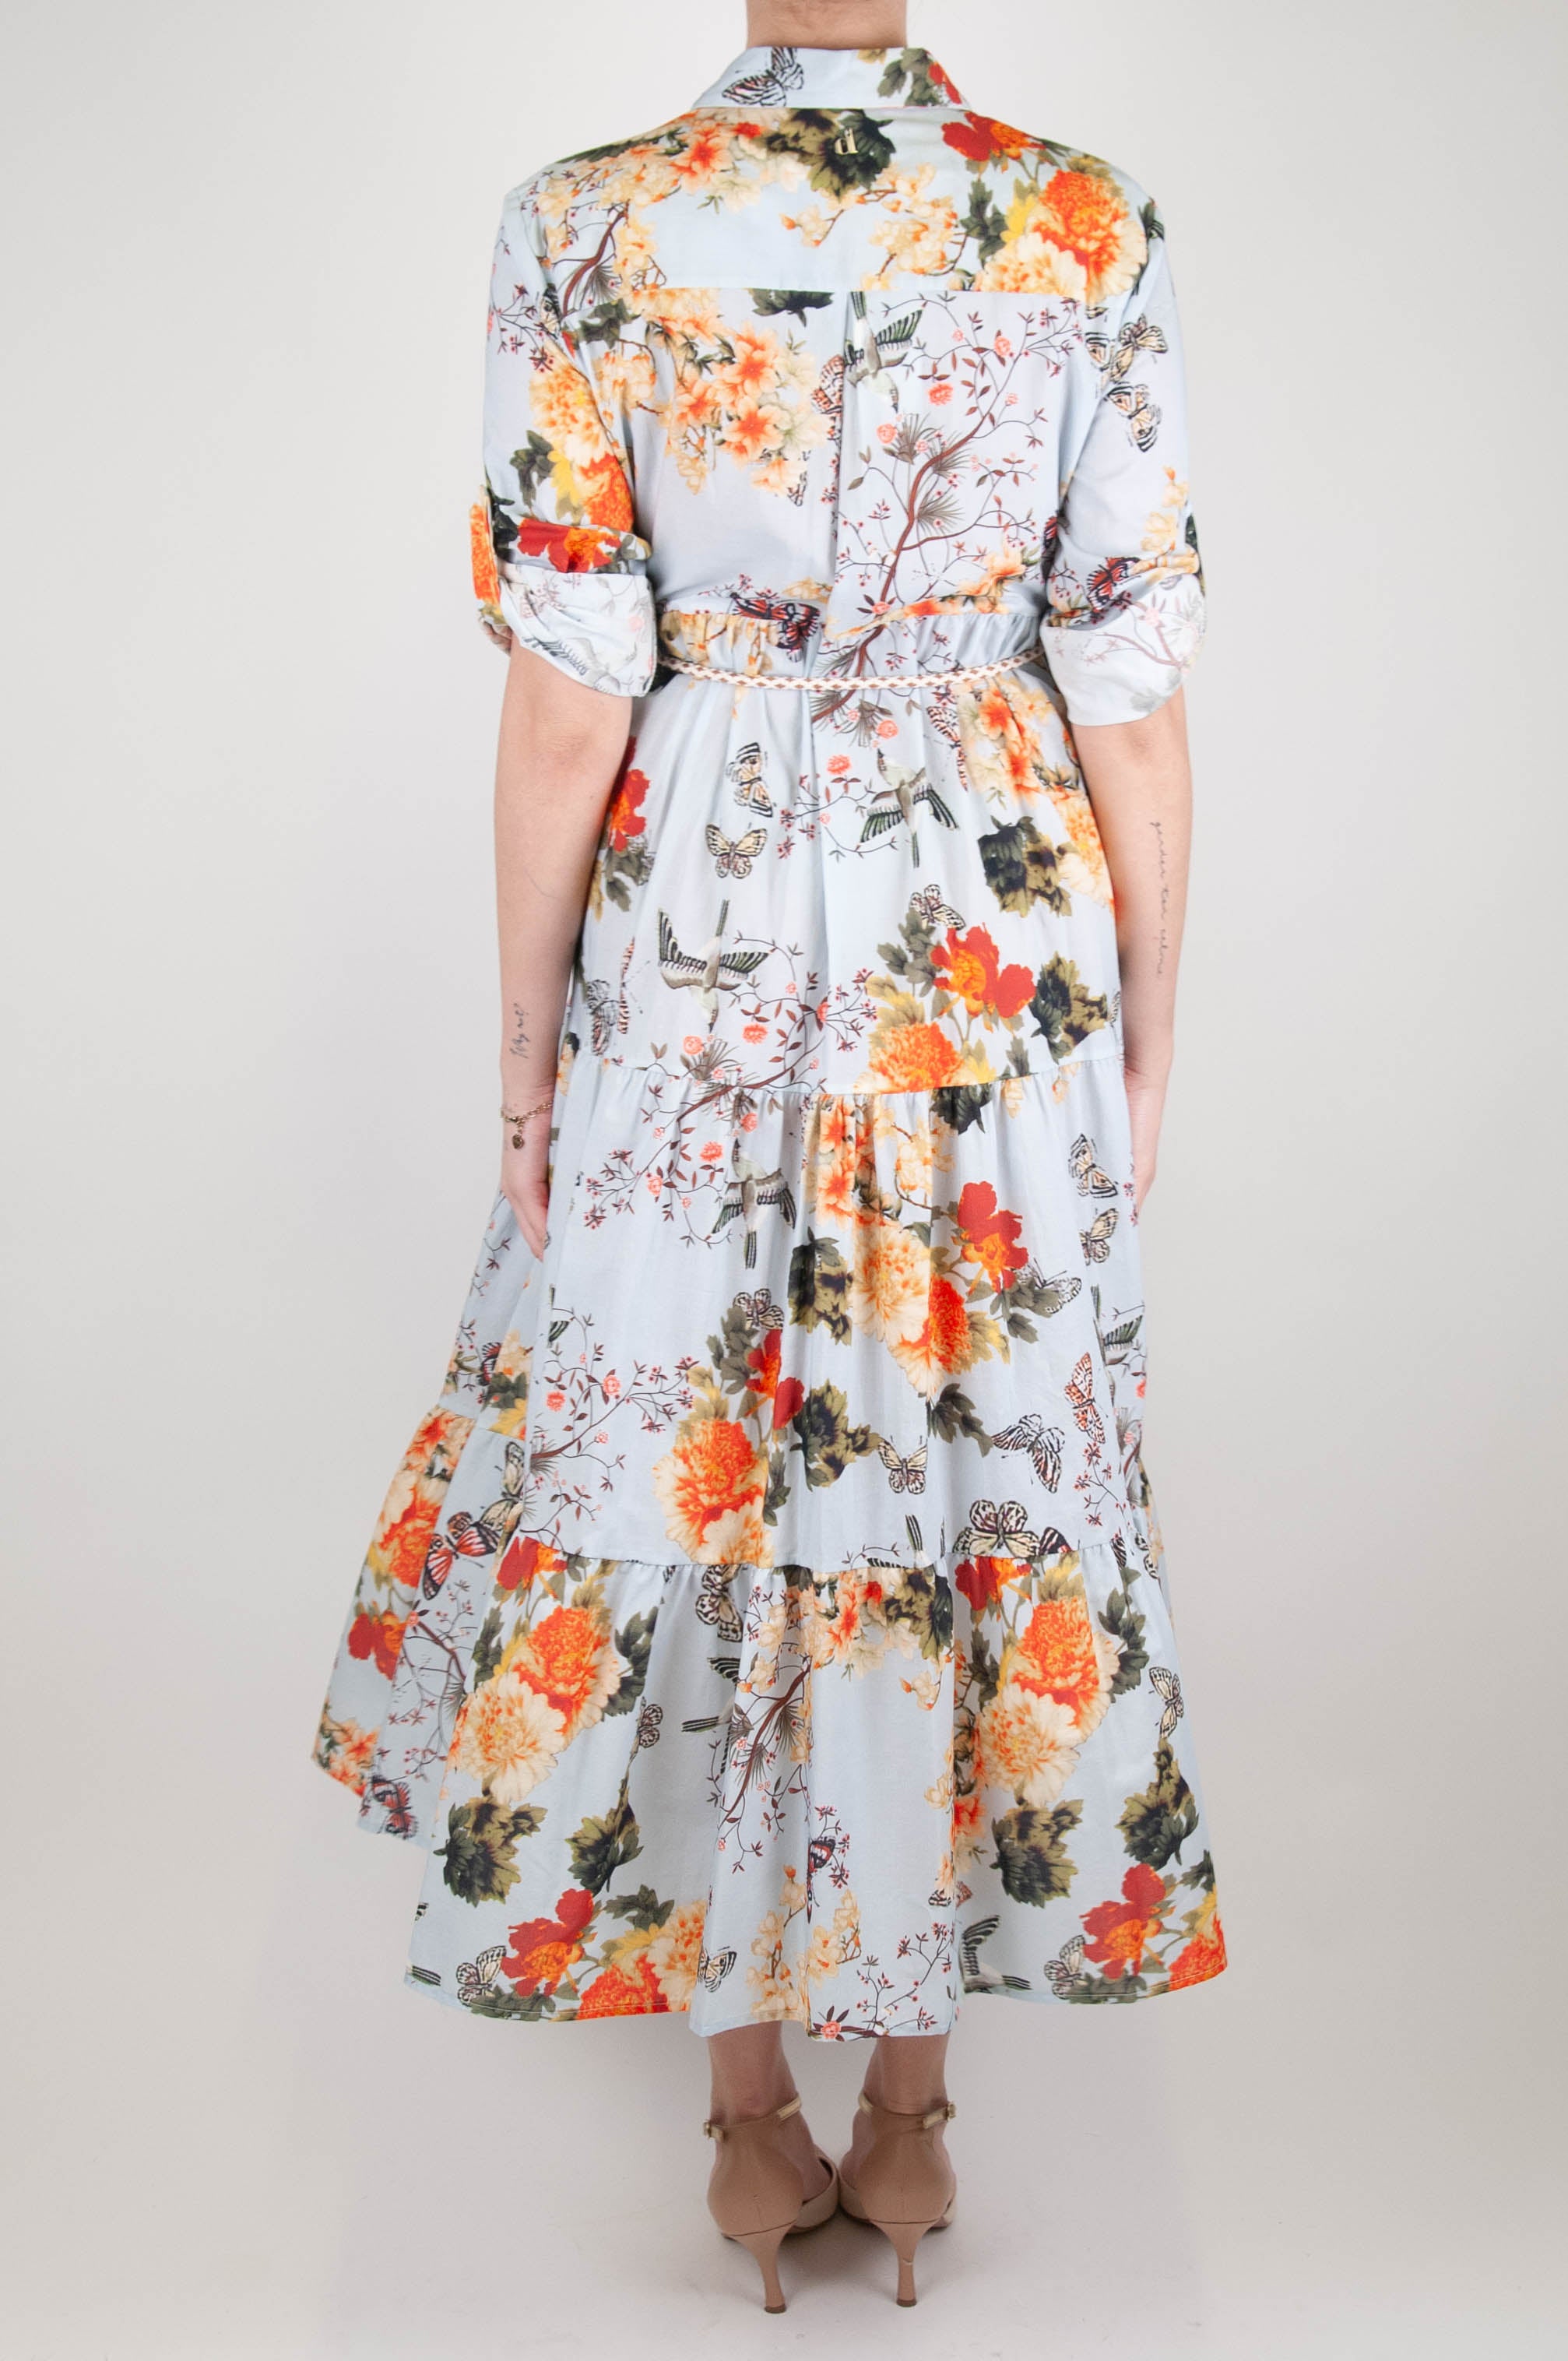 Dixie - Floral patterned shirtdress with flounces and rope belt